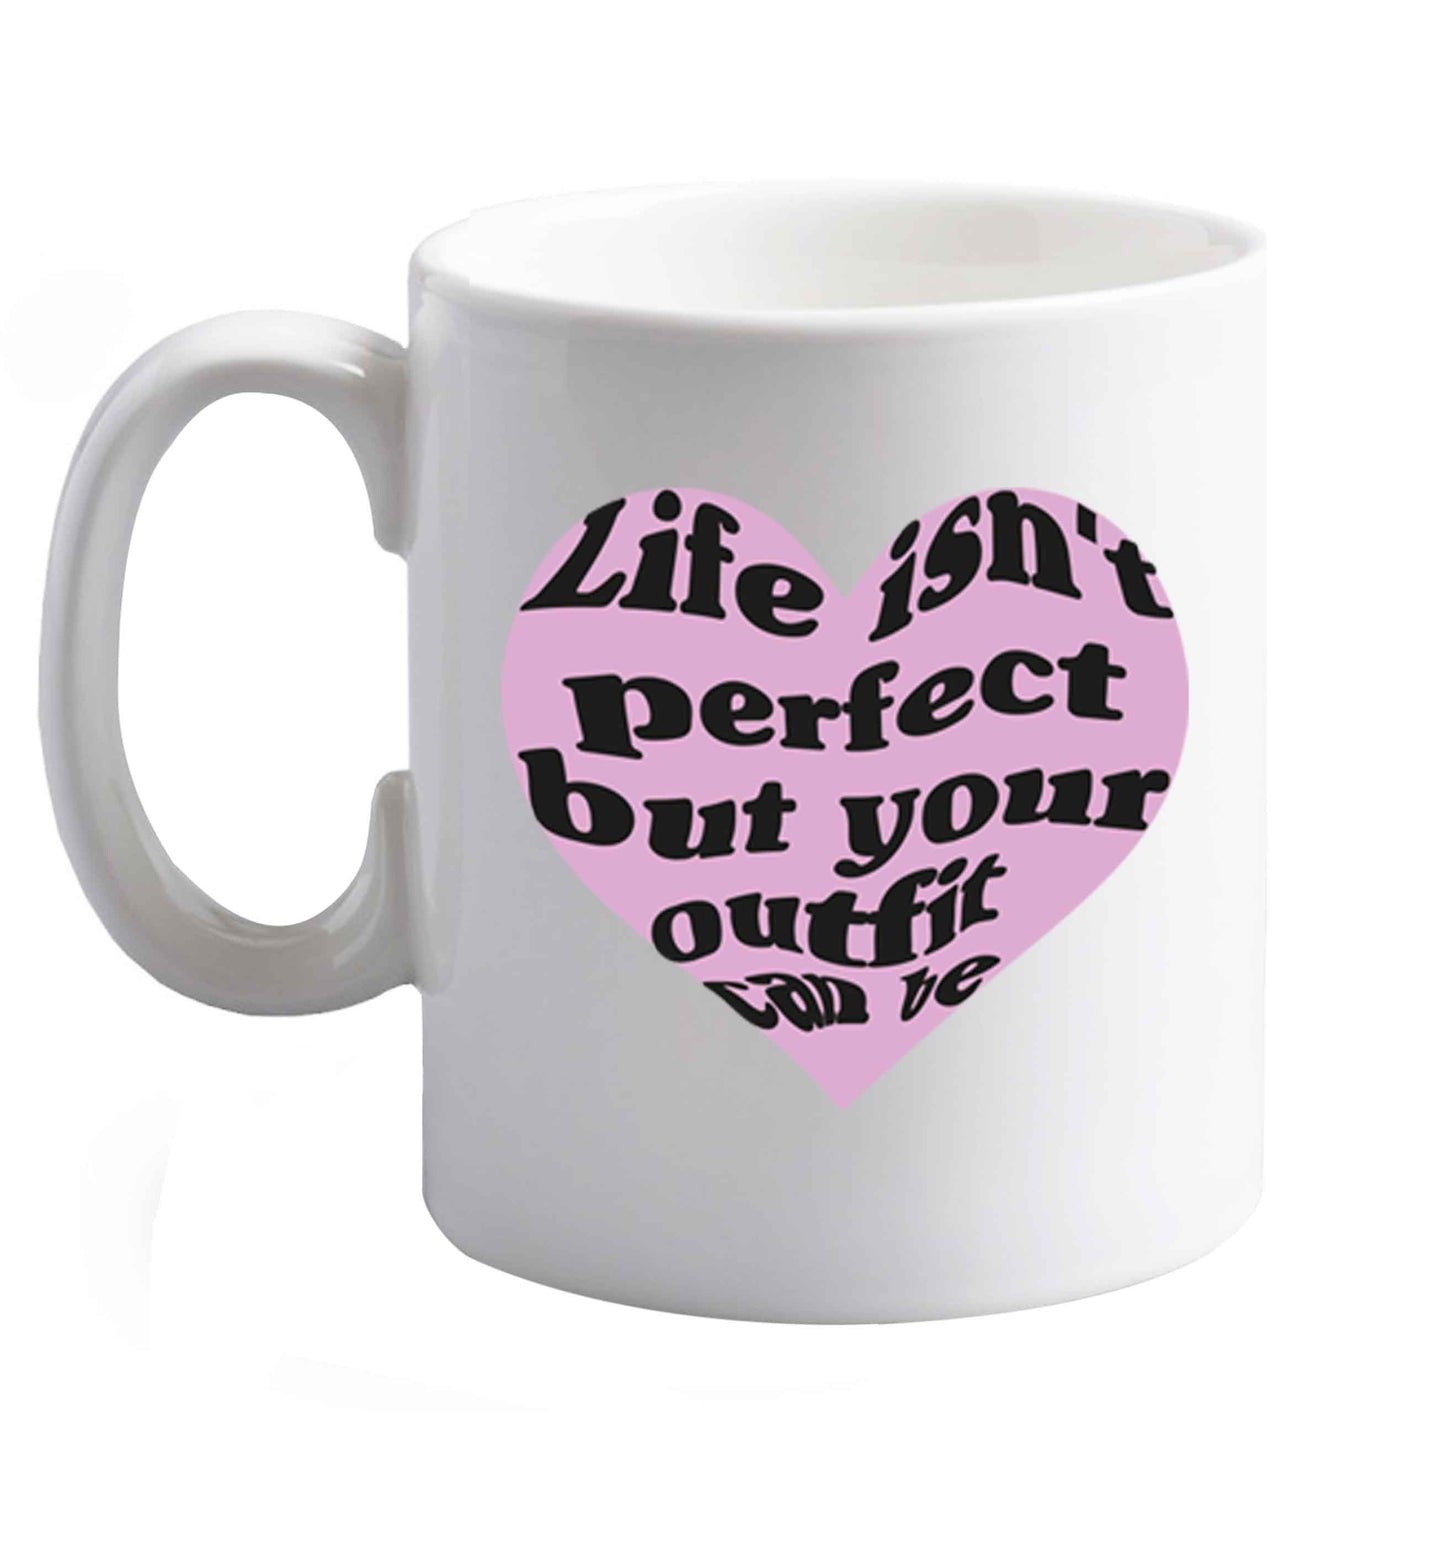 10 oz Life isn't perfect but your outfit can be  ceramic mug right handed